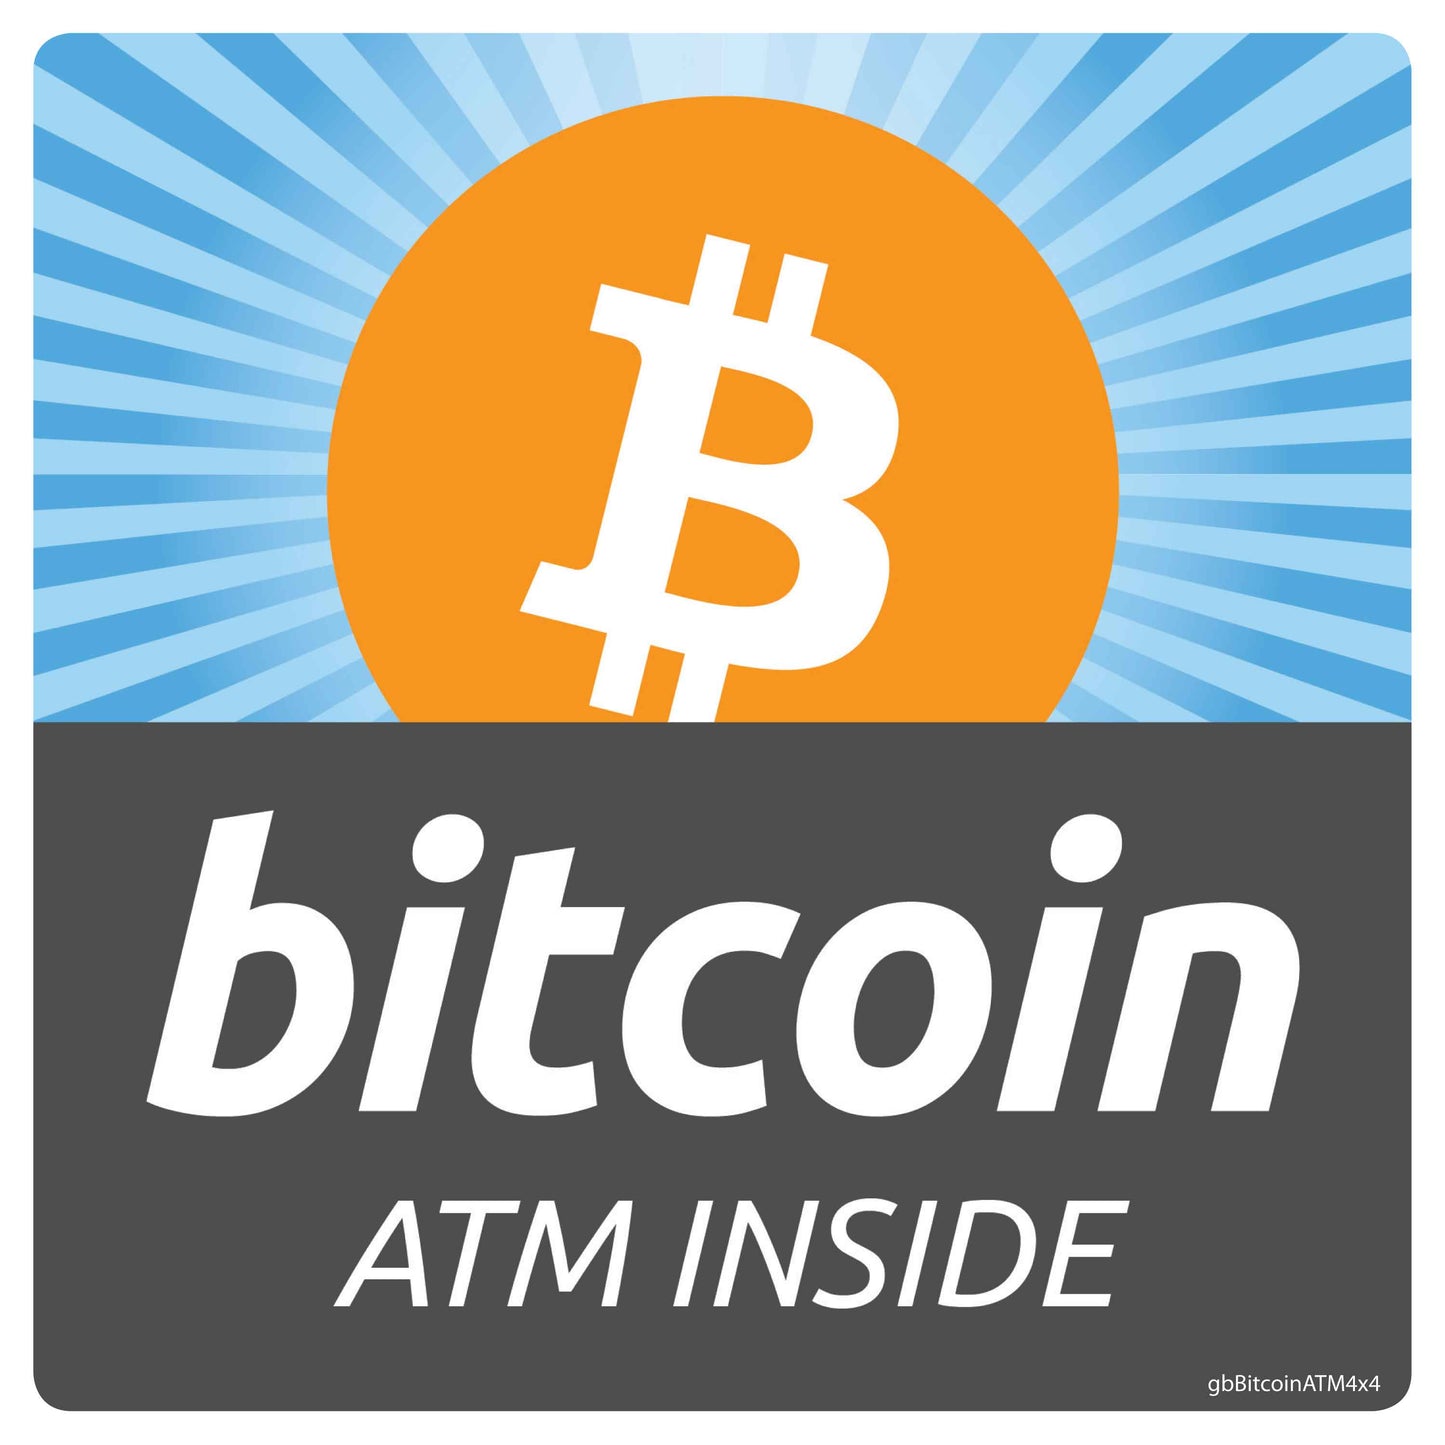 Bitcoin ATM Inside Decal. 4 inches by 4 inches in size.